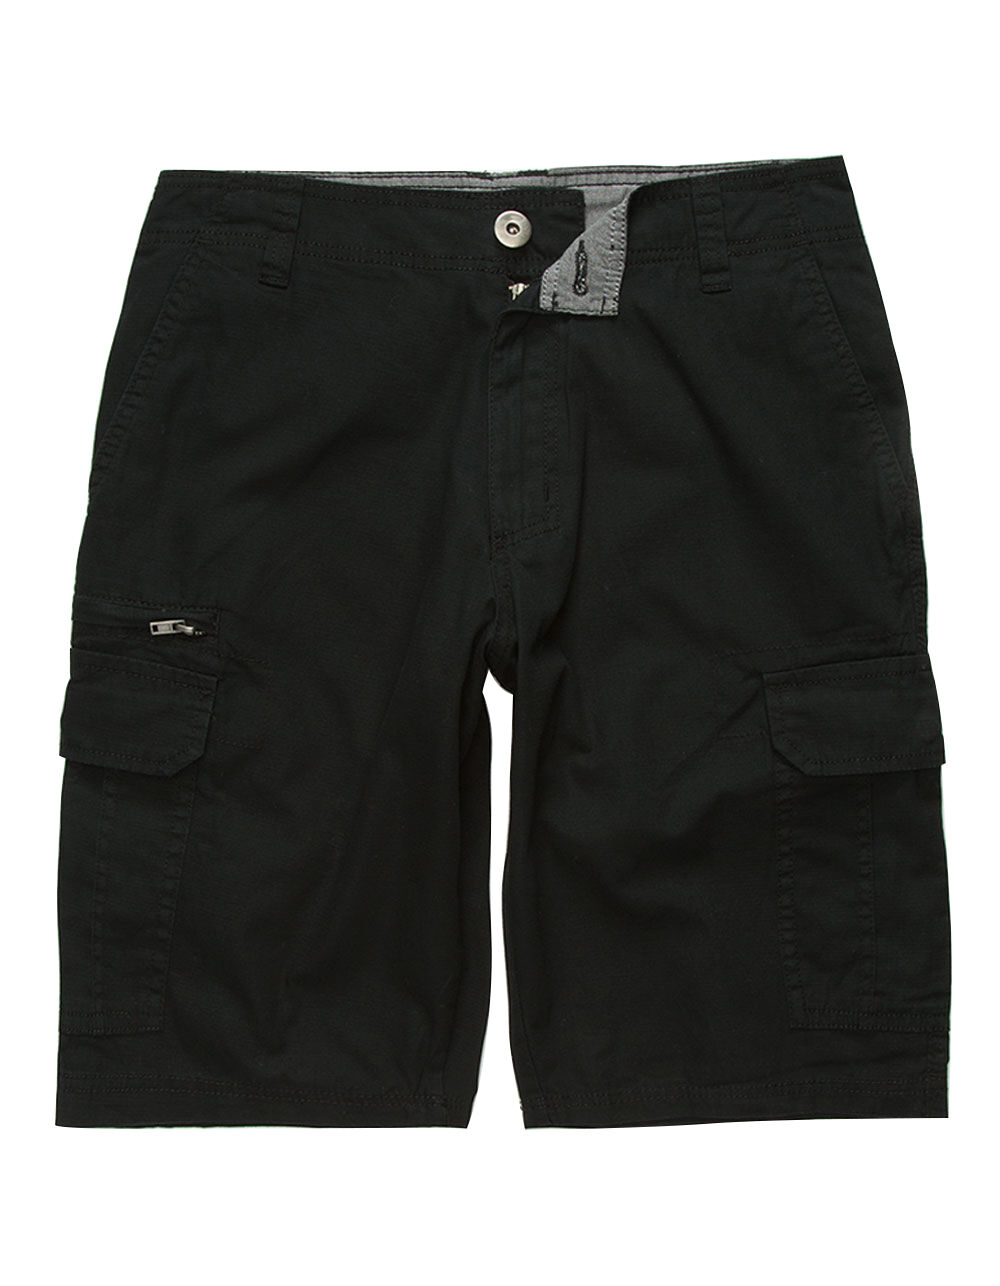 SUBCULTURE TEXTURED CARGO SHORTS